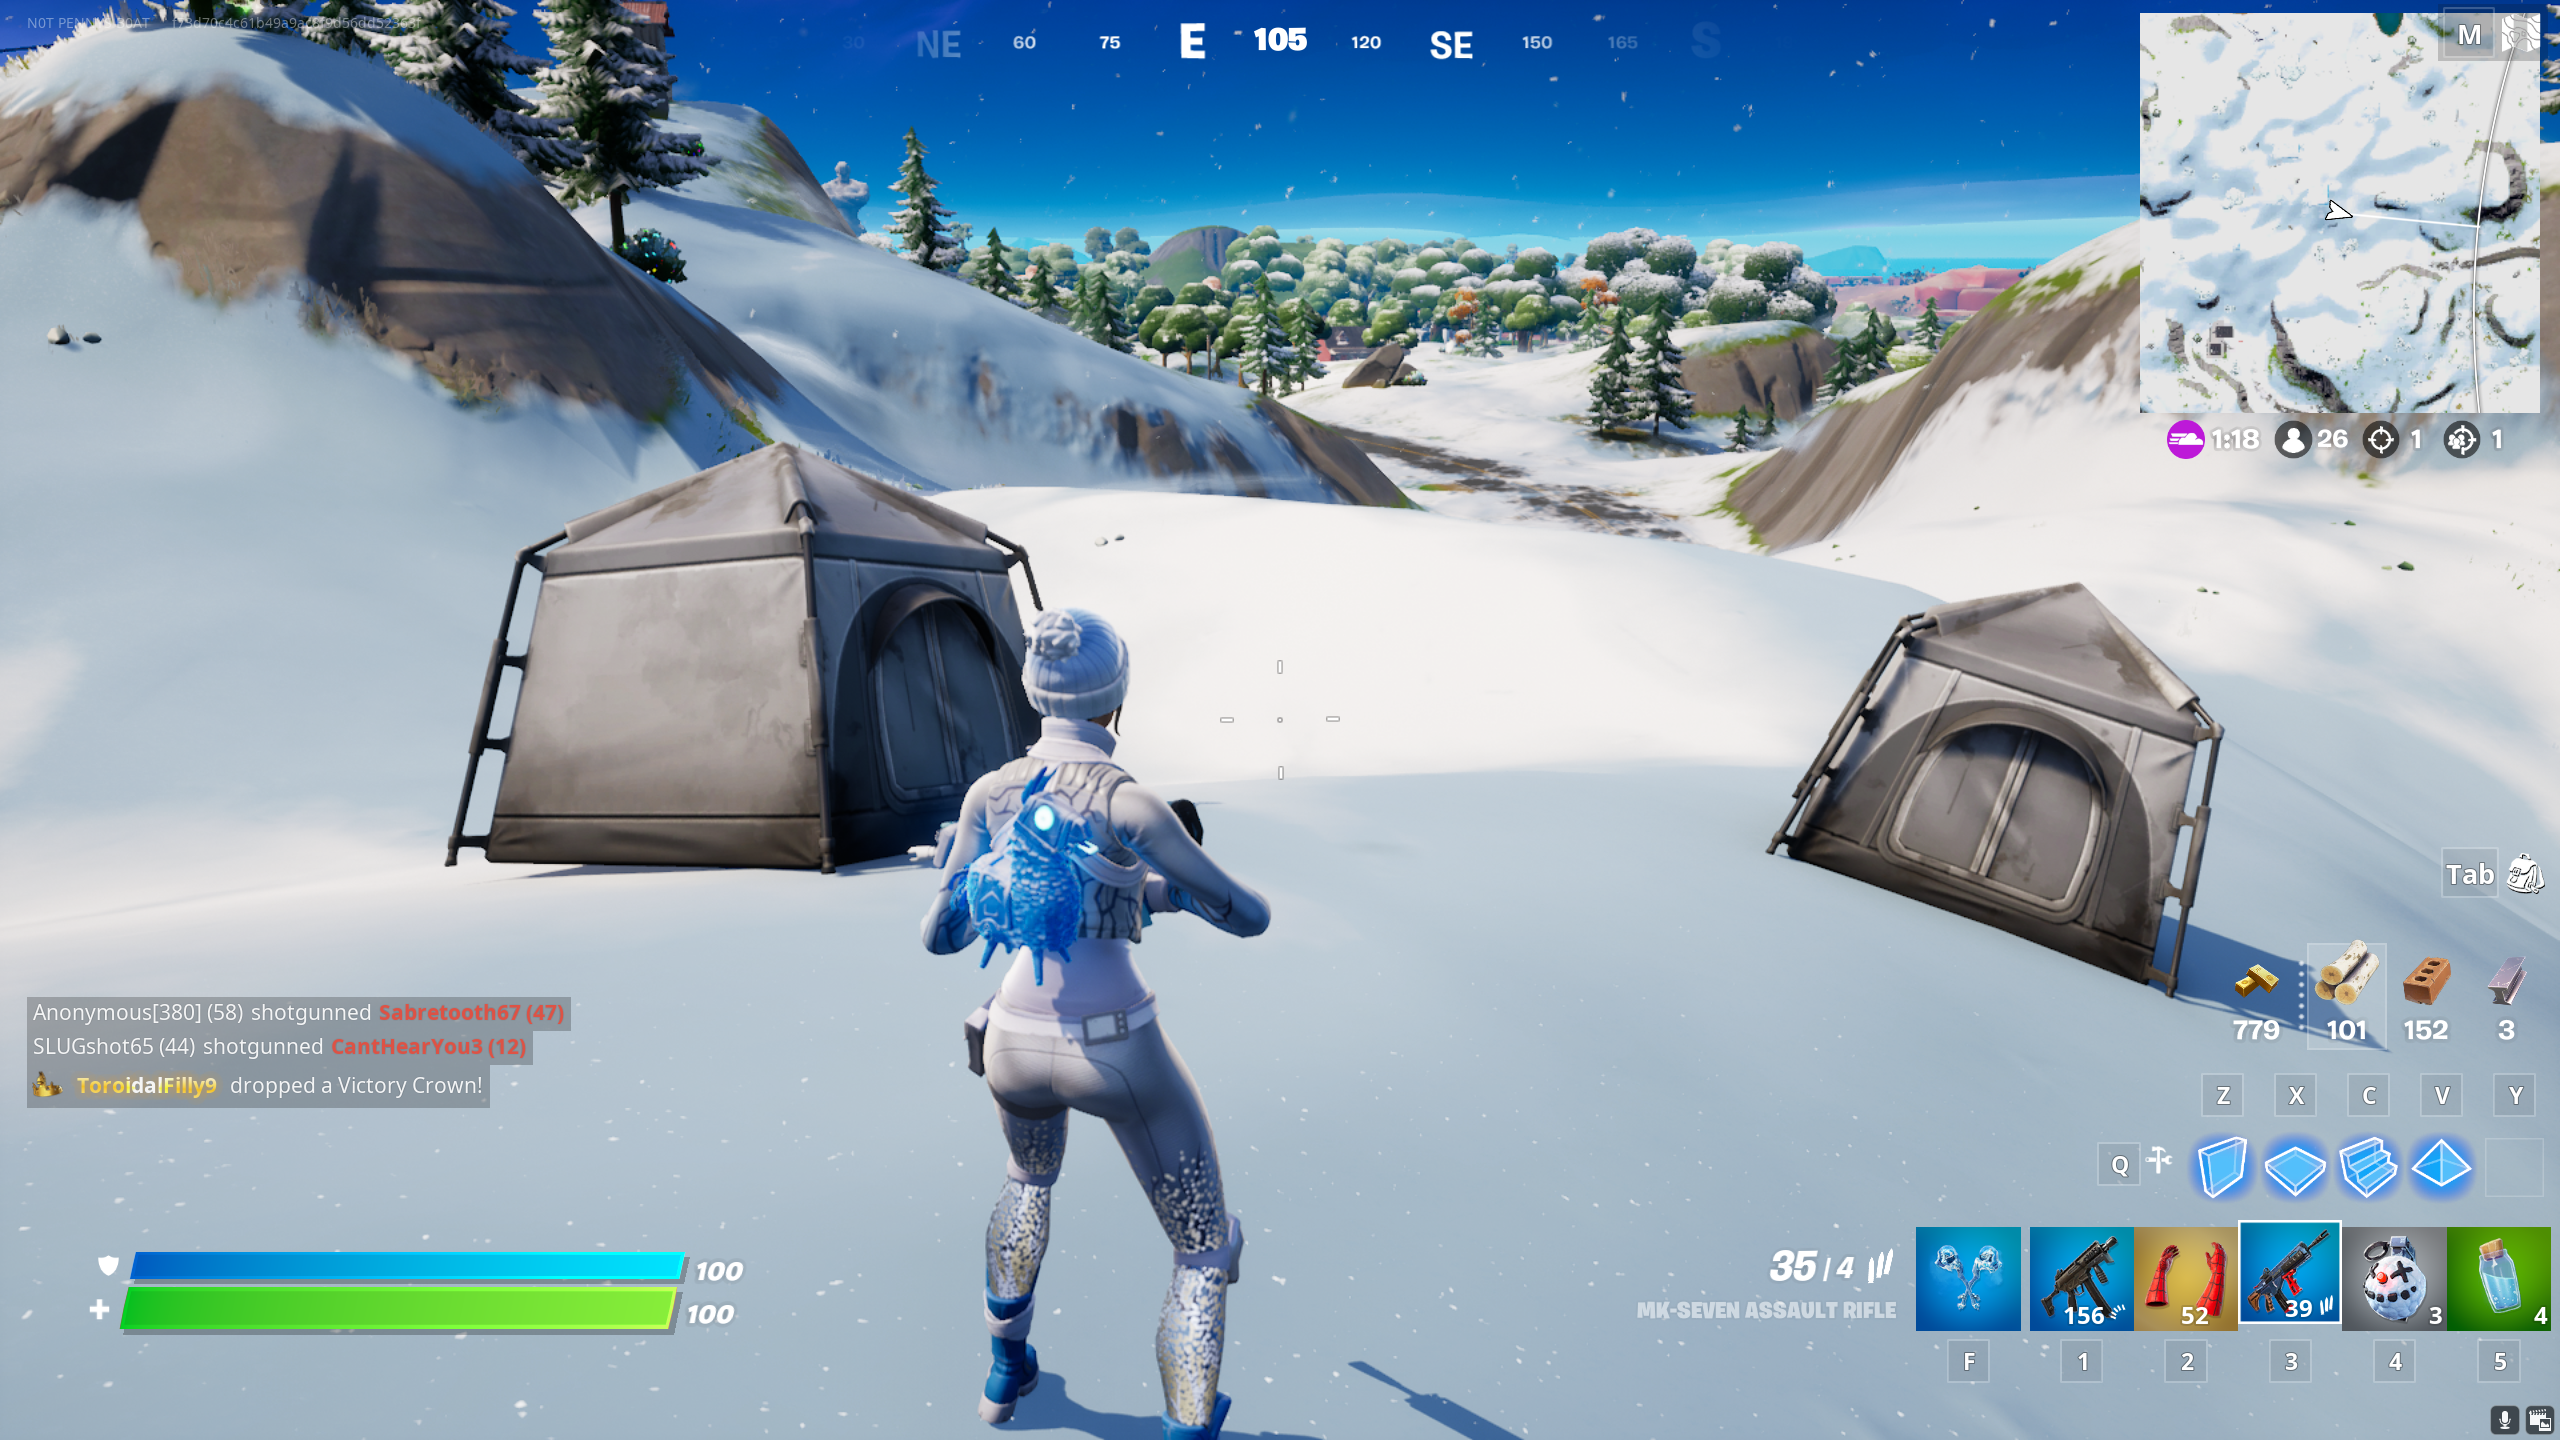 Where to find abandoned tents in Fortnite.